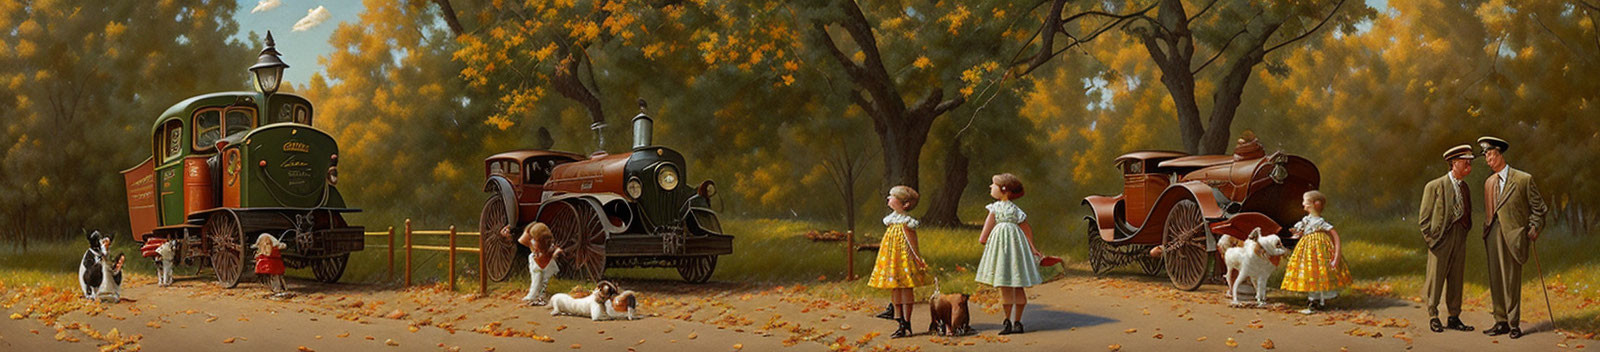 Autumnal Scene with Vintage Train Carriages and People in Nature